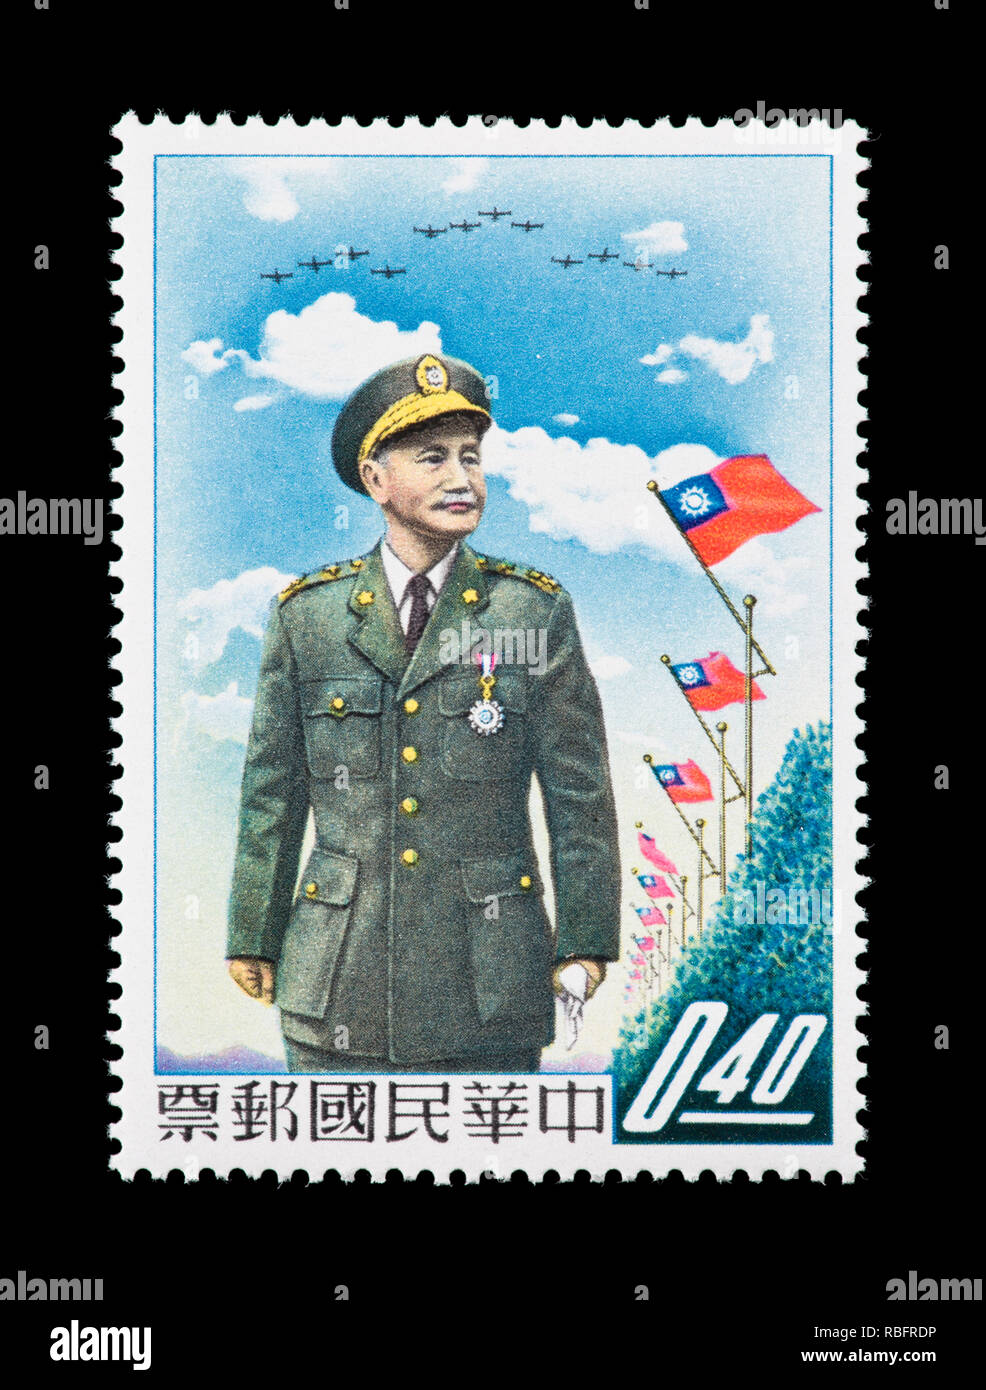 Postage stamp from the Republic of China depicting president Chiang Kai-shek. Stock Photo